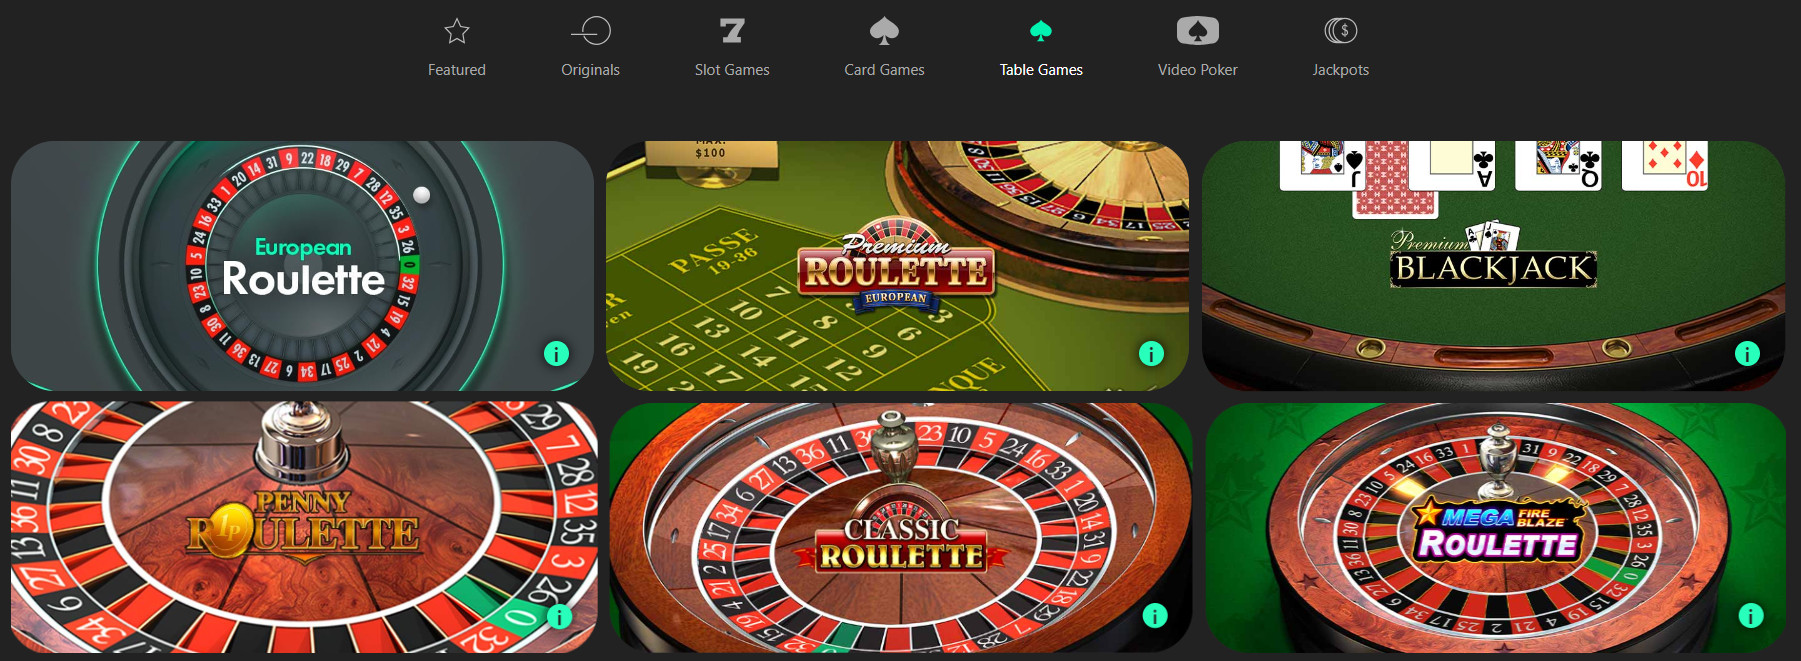 Table Games at Bet365 Casino